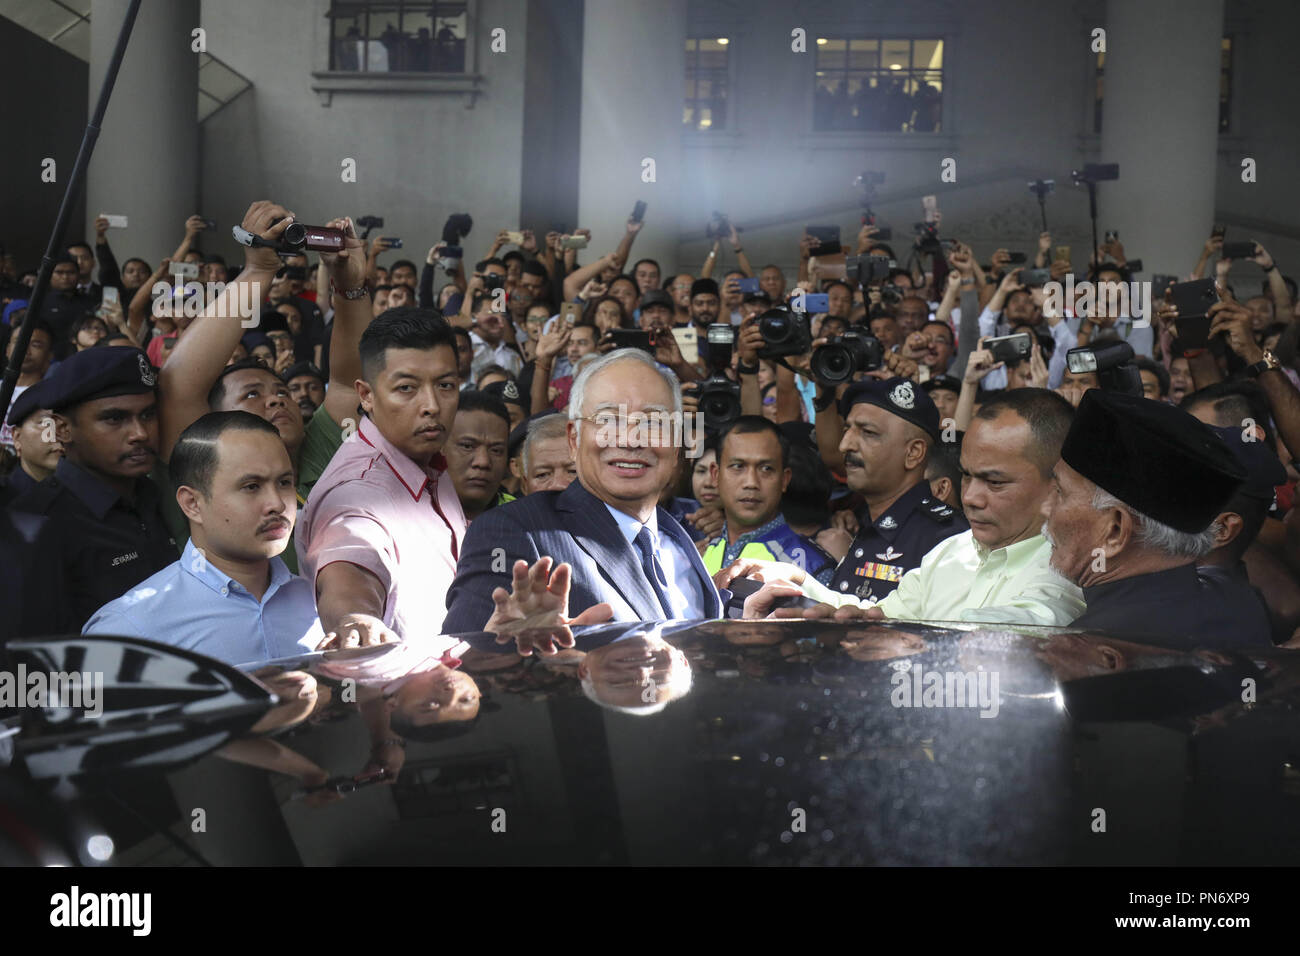 September 20, 2018 - Kuala Lumpur, Malaysia - Former Malaysia Prime Minister NAJIB RAZAK leaves Kuala Lumpur High Court after a court hearing. Najib pleaded not guilty Thursday to 21 counts of money laundering and a separate four counts of abuse of power. (Credit Image: © Kepy/ZUMA Wire) Stock Photo